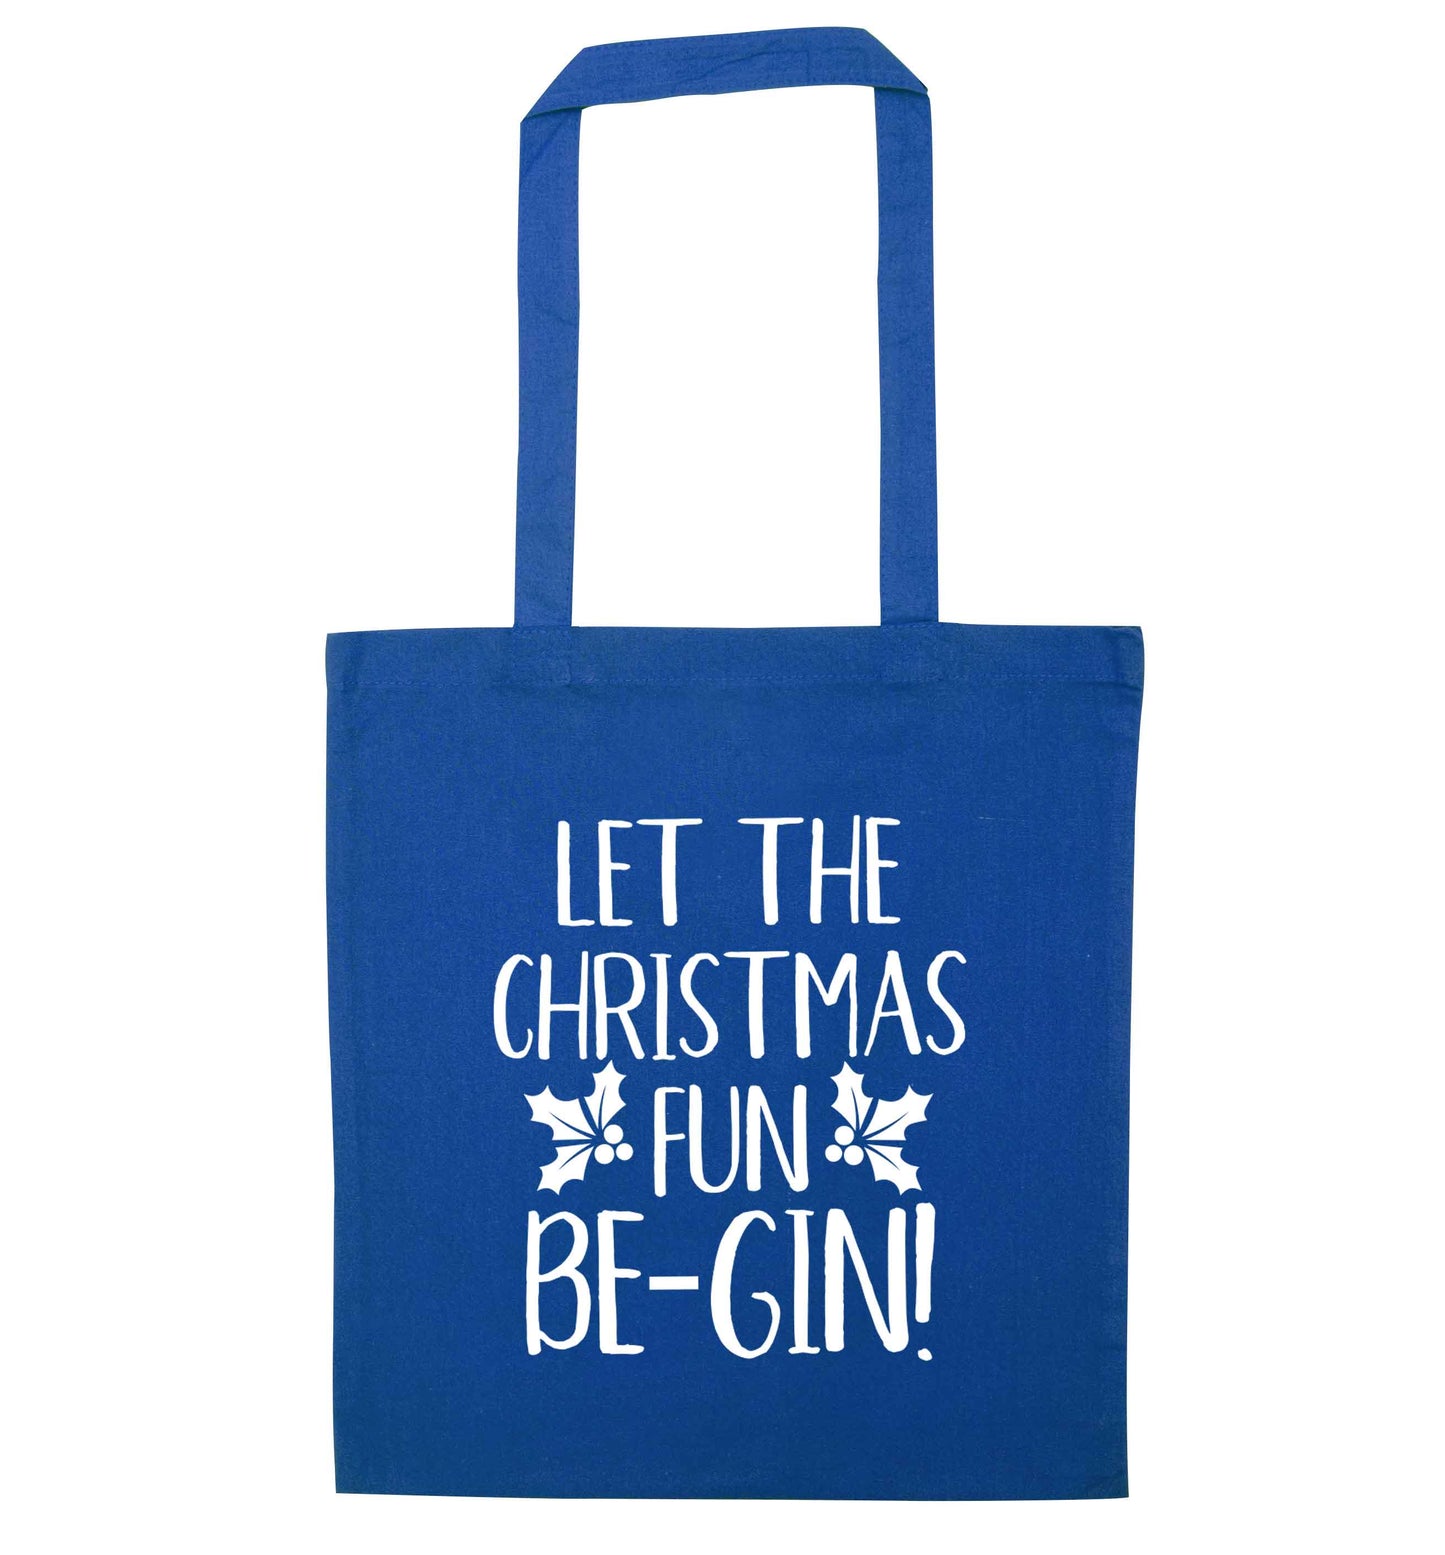 Let the christmas fun be-gin blue tote bag